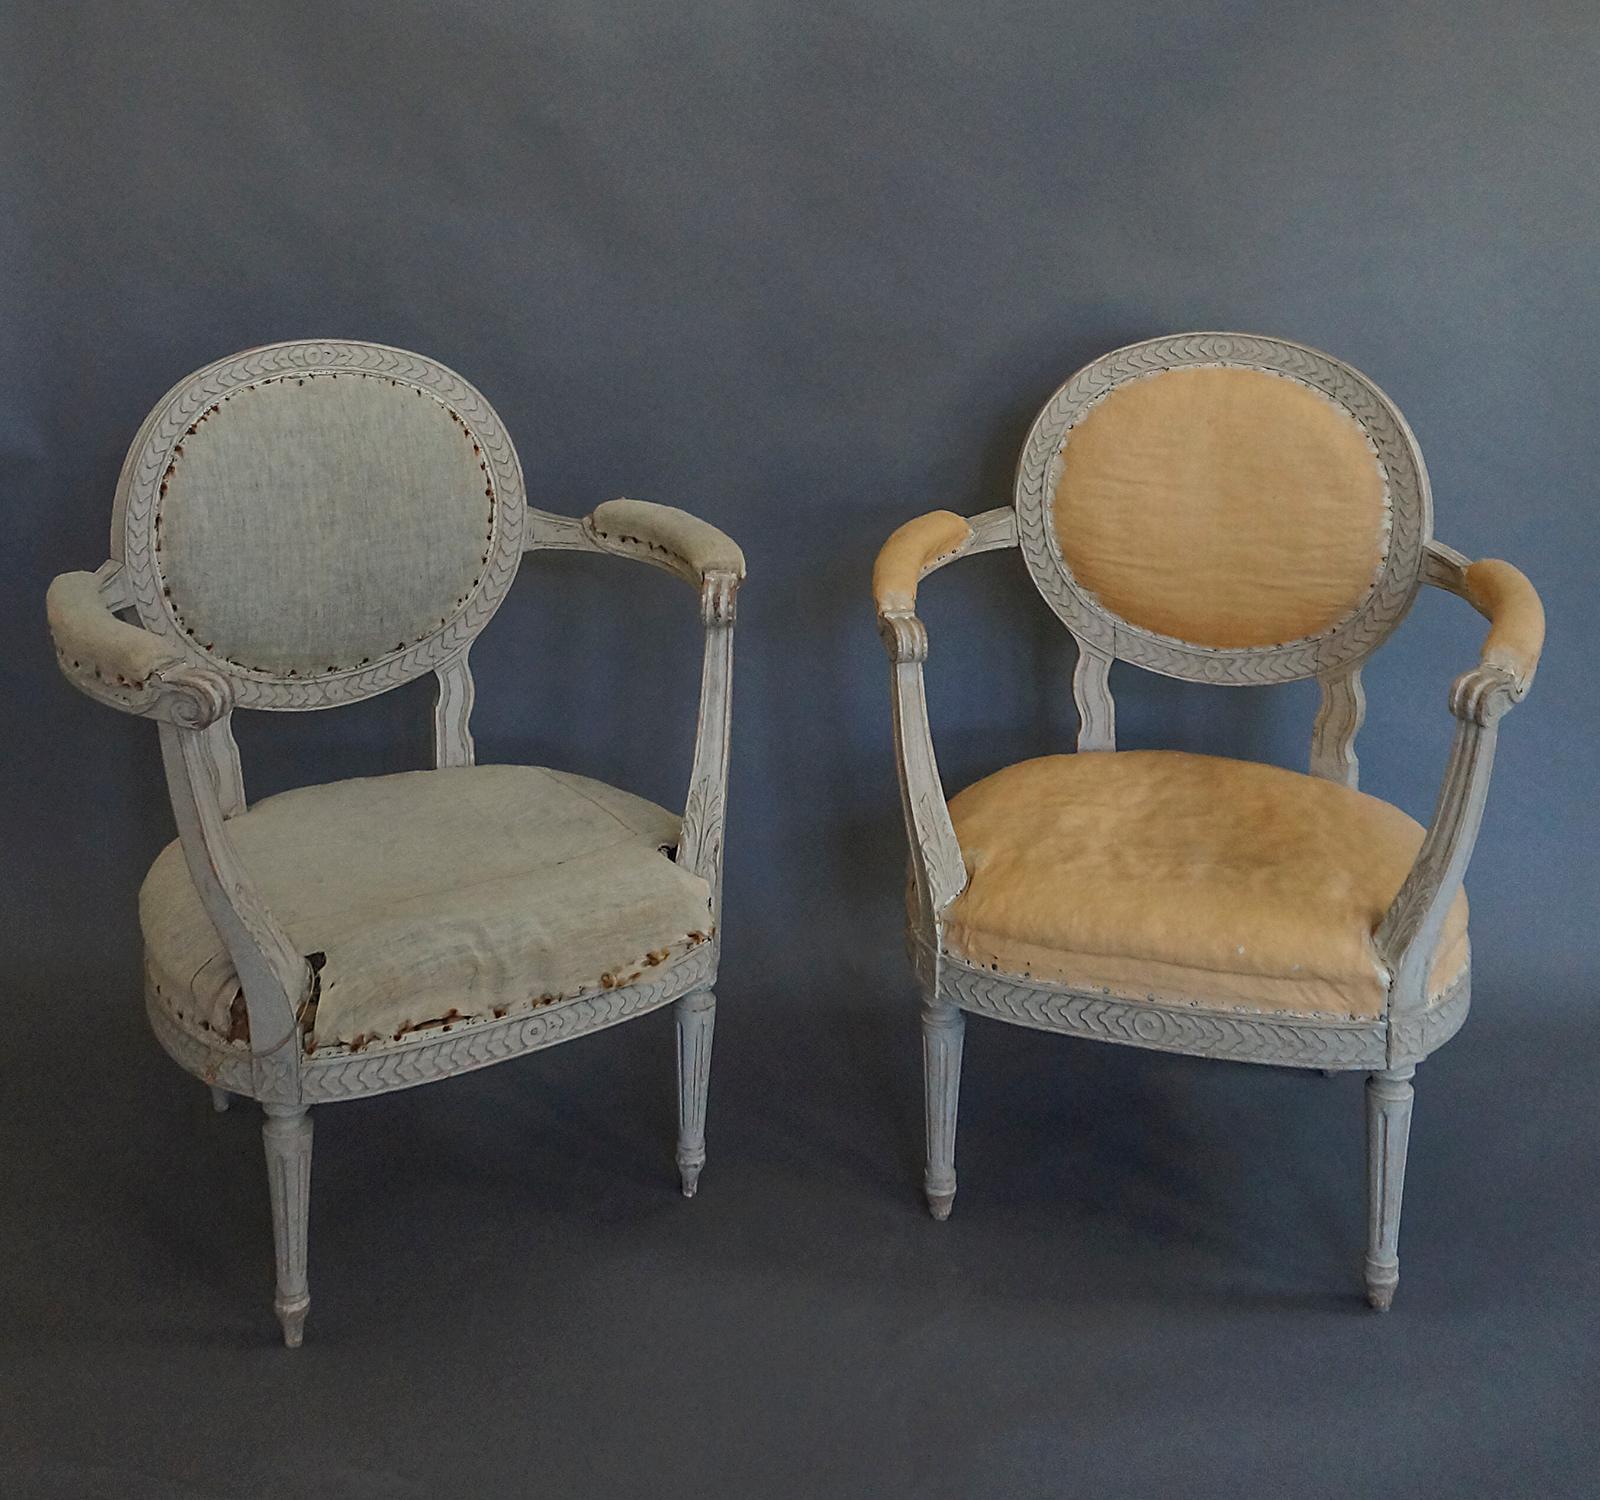 Pair of Gustavian style armchairs, Sweden, circa 1900, with oval backs and flared arms. Chain molding around the oval back and seat. Tapering round legs. Very comfortable.